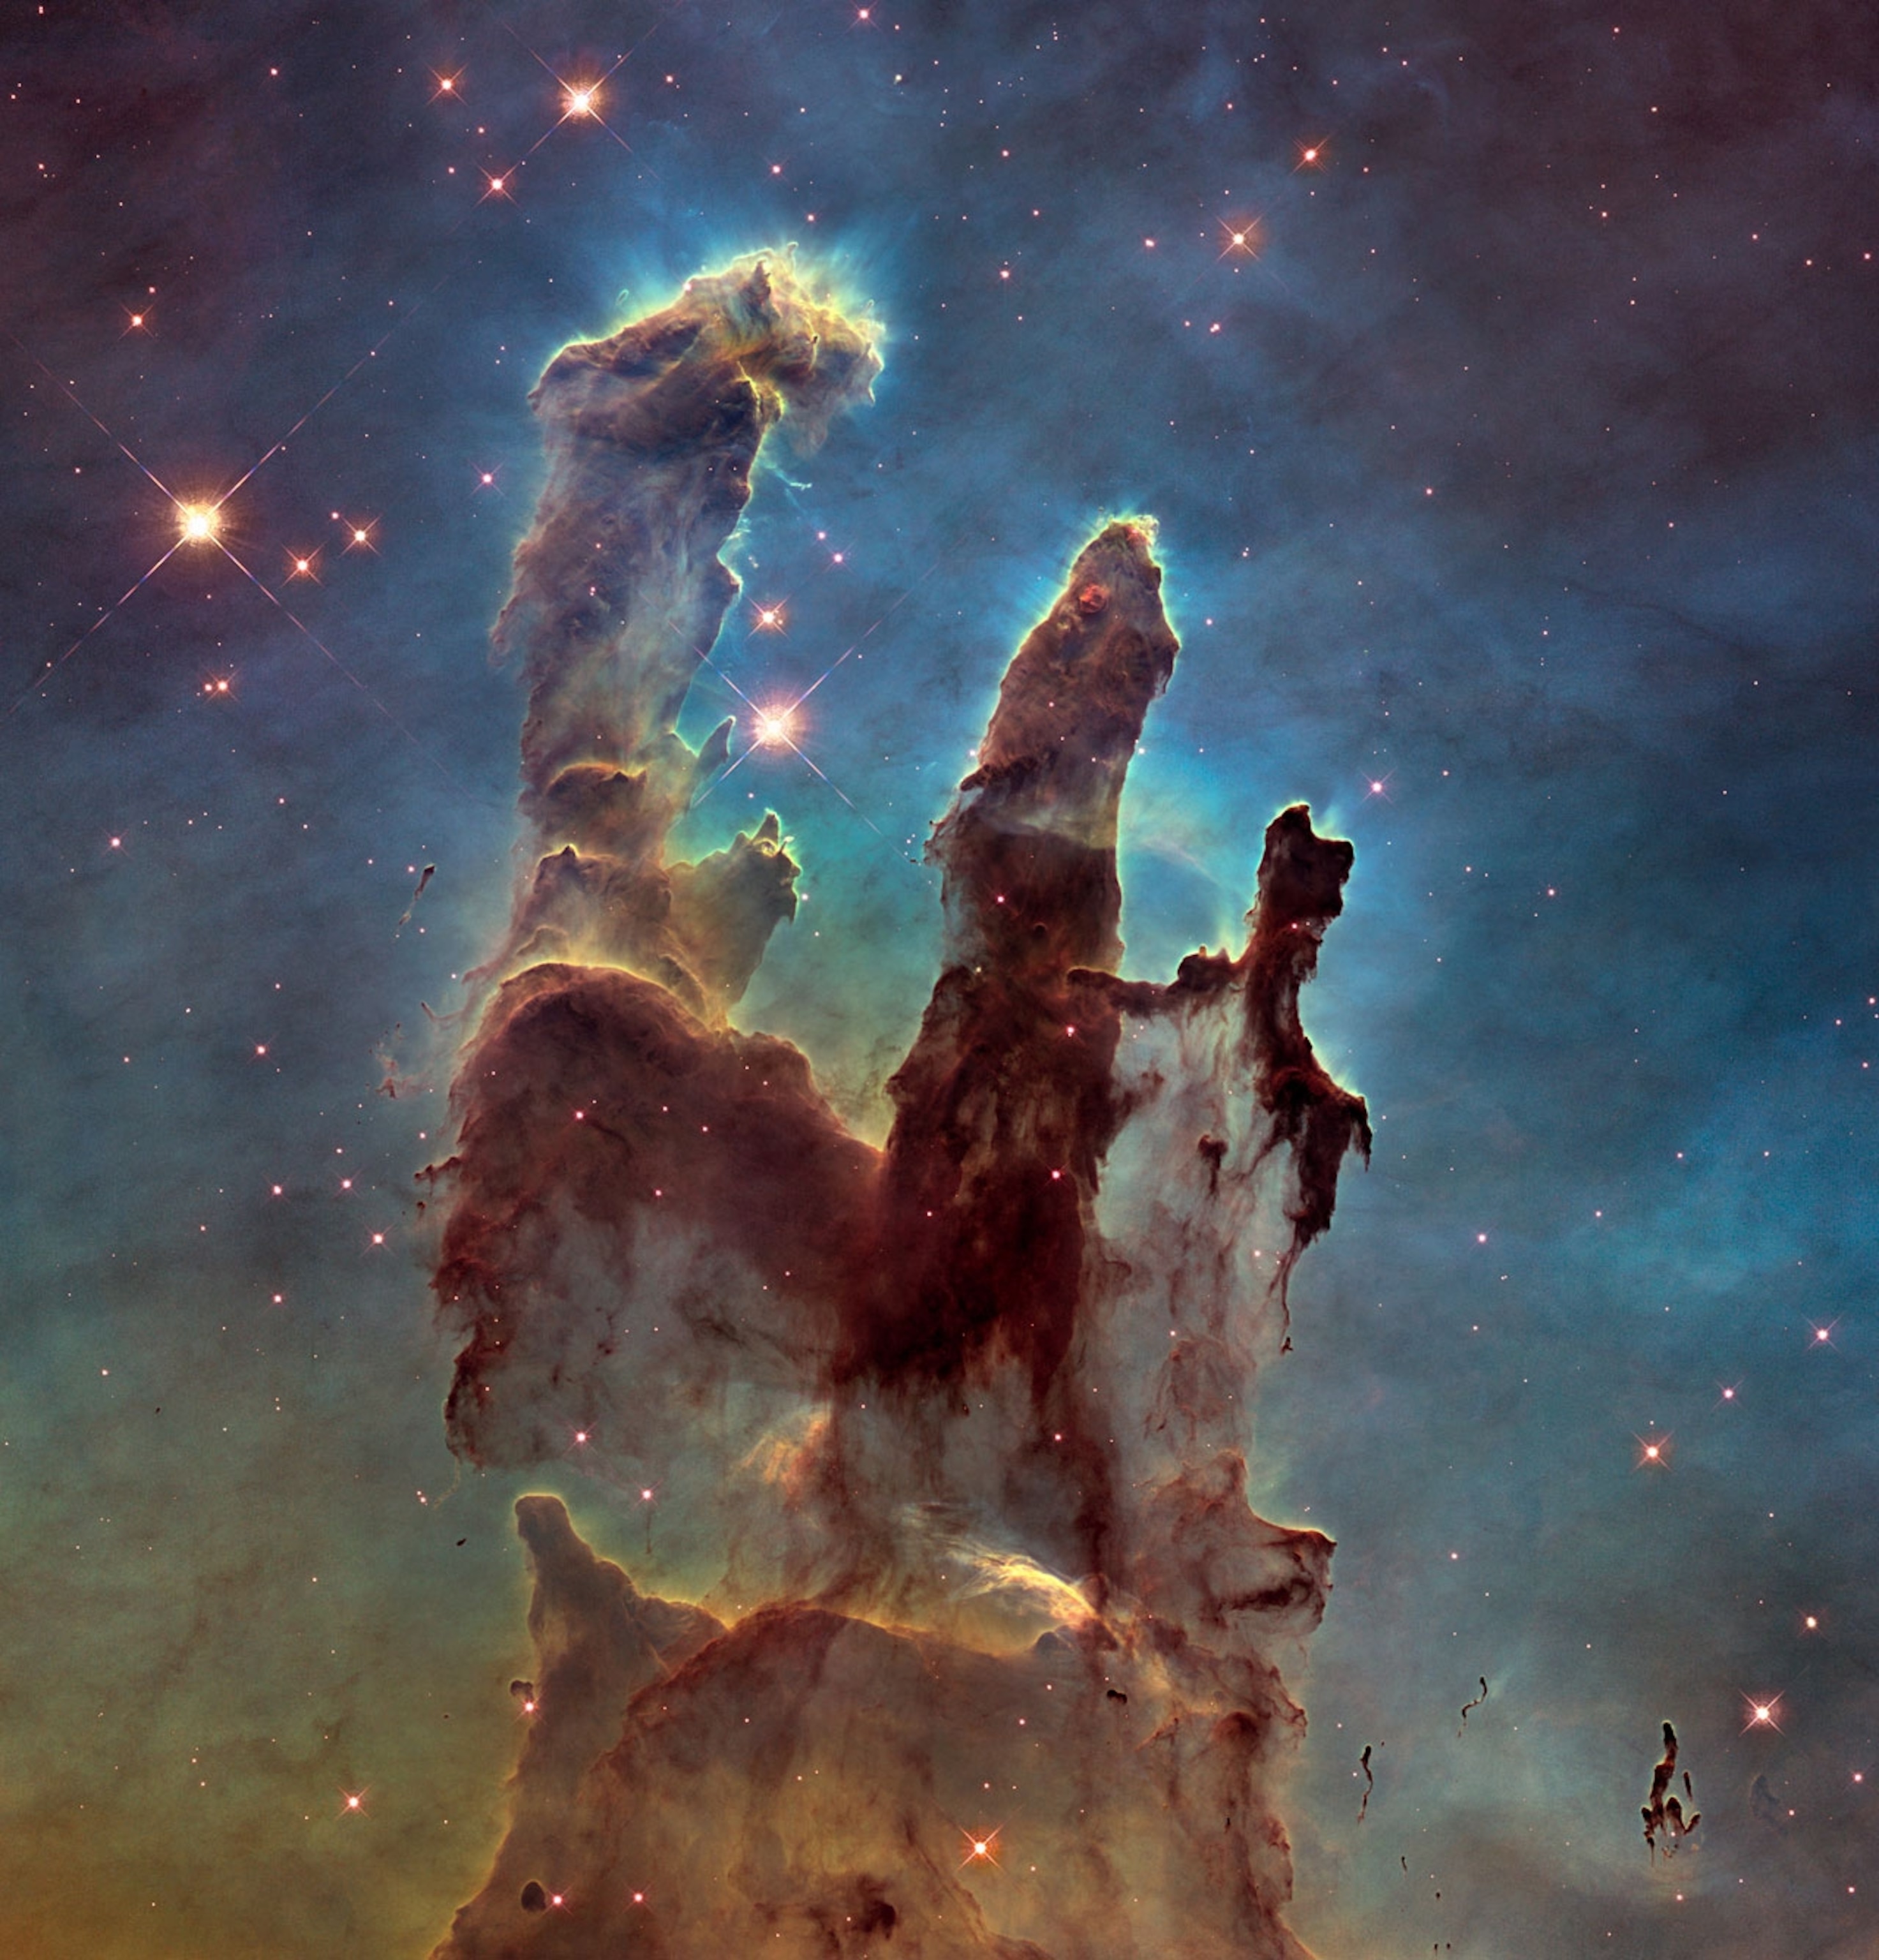 The Pillars of Creation in the Eagle Nebula 6,500 light years away, taken by the telescope in 2015. (ESA/Hubble/Hubble Heritage Team)